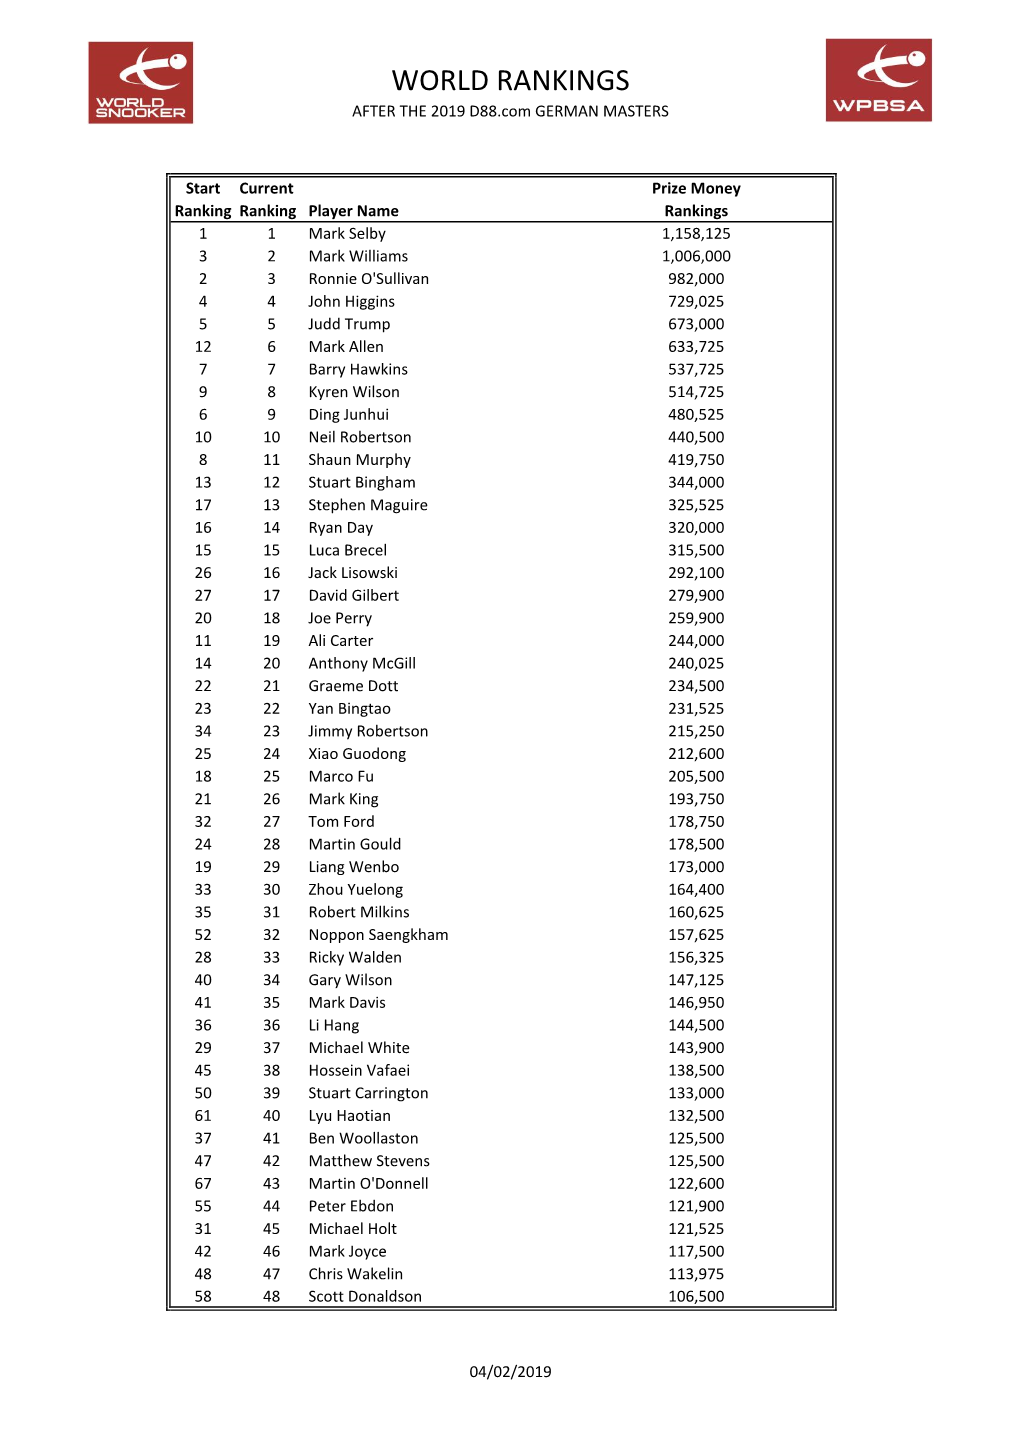 WORLD RANKINGS AFTER the 2019 D88.Com GERMAN MASTERS